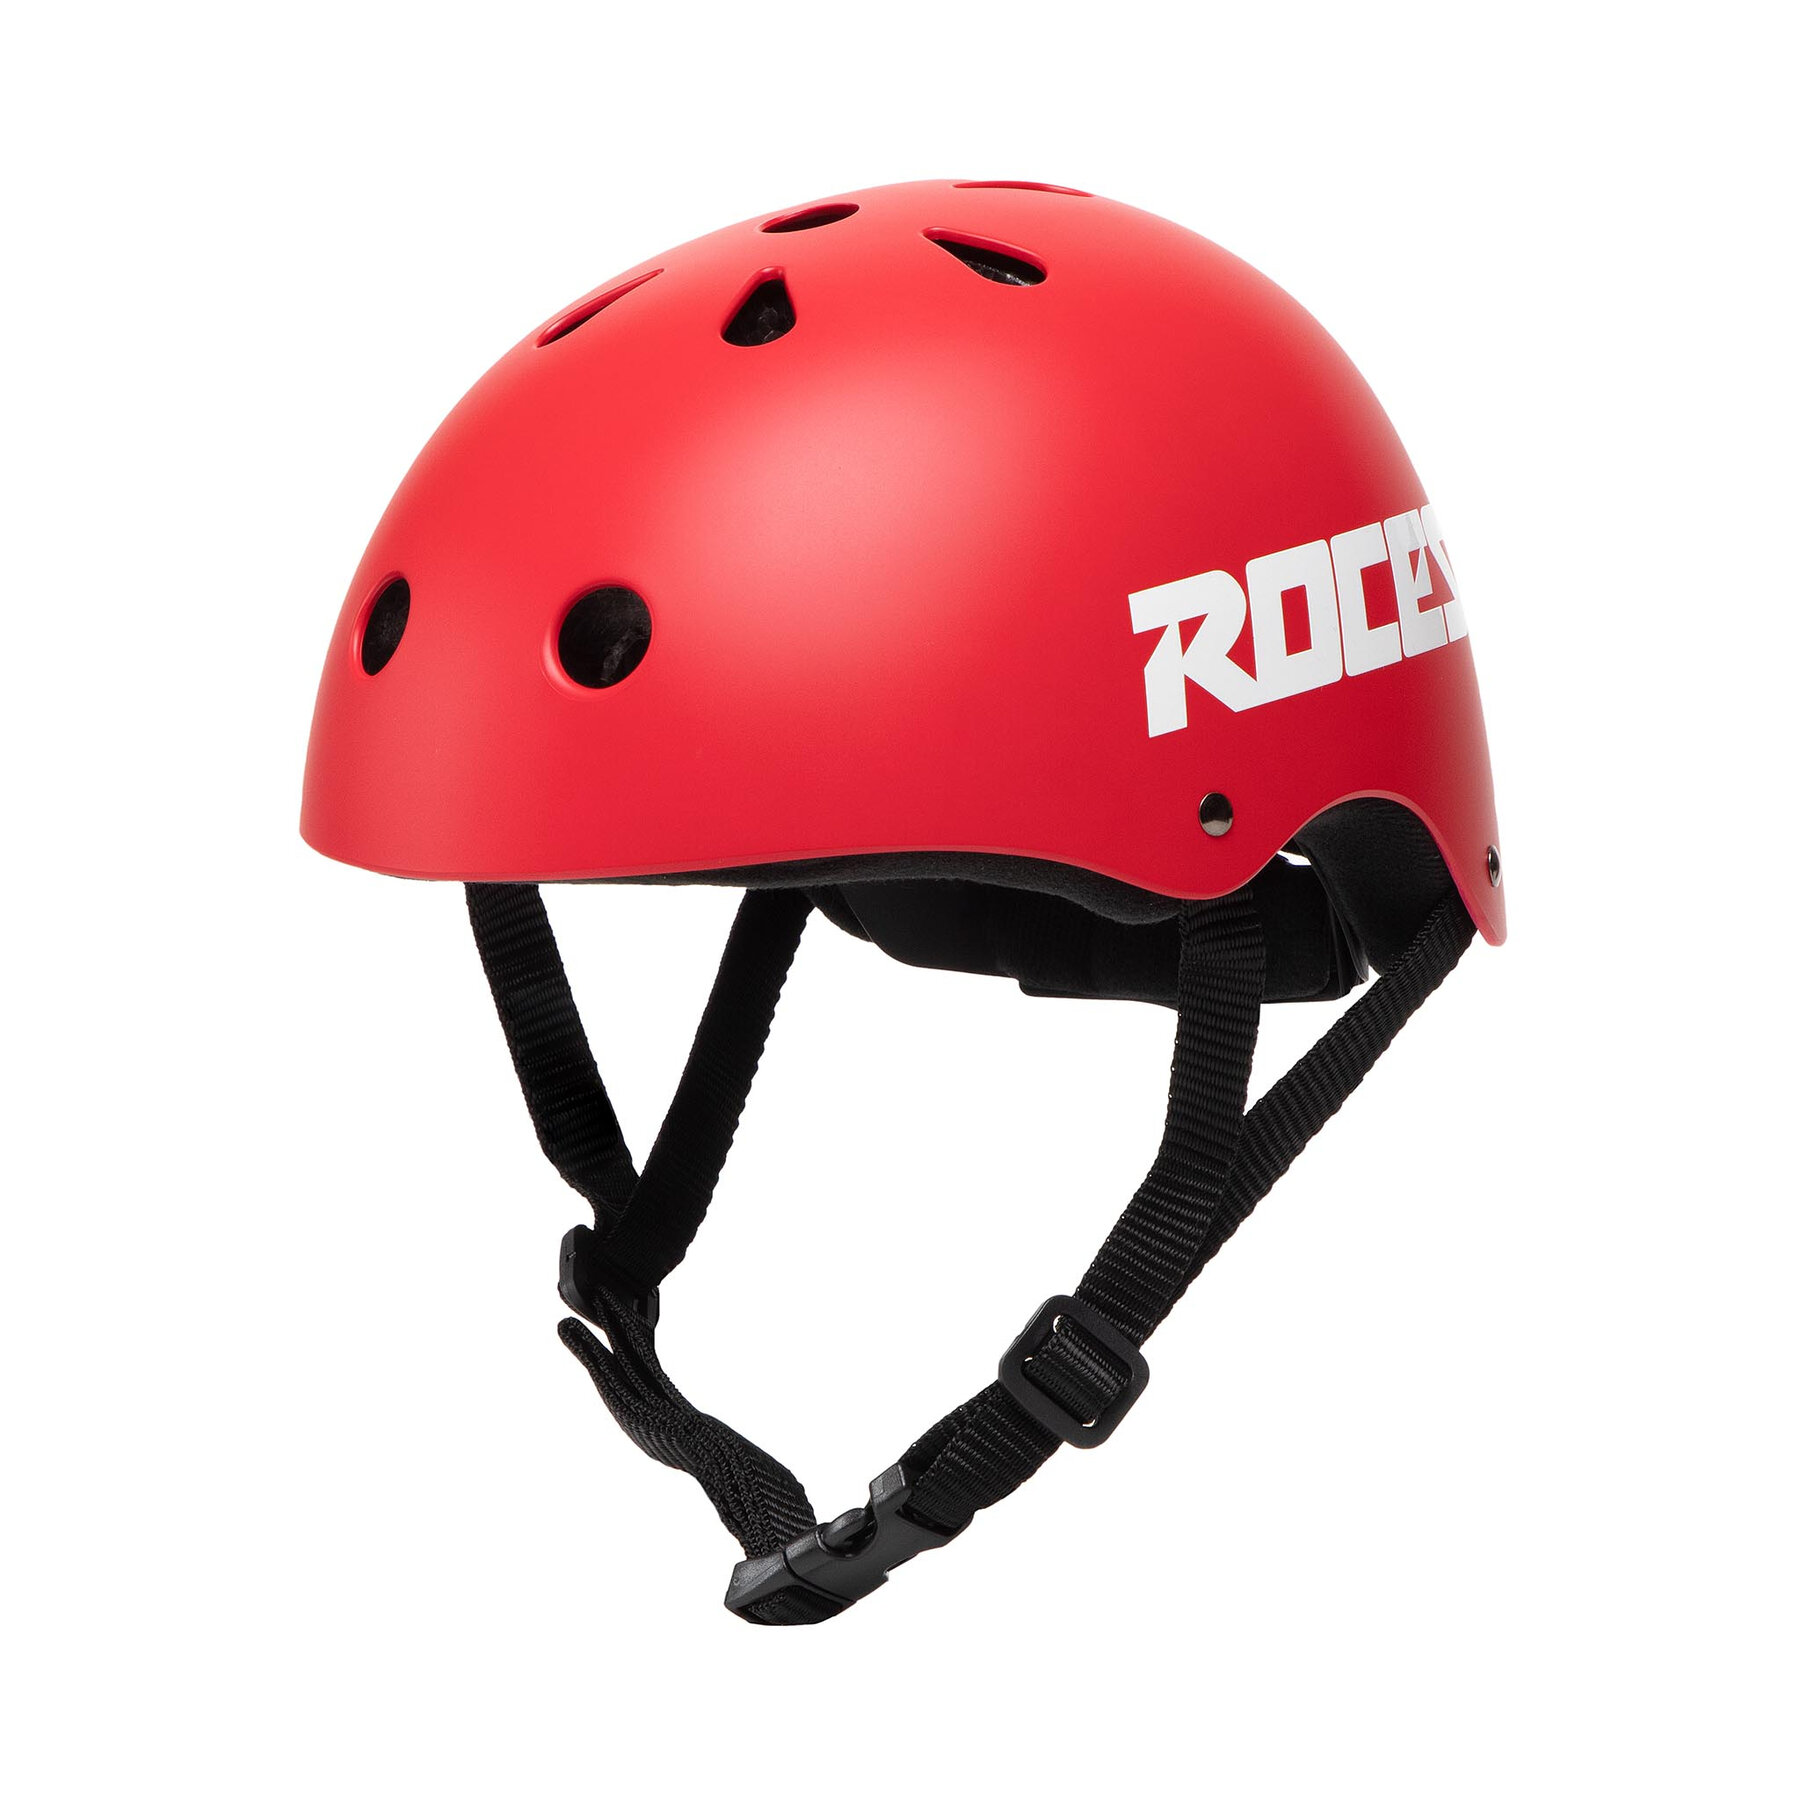 kask_skate Roces Ce Aggressive Helmet 300756 Red